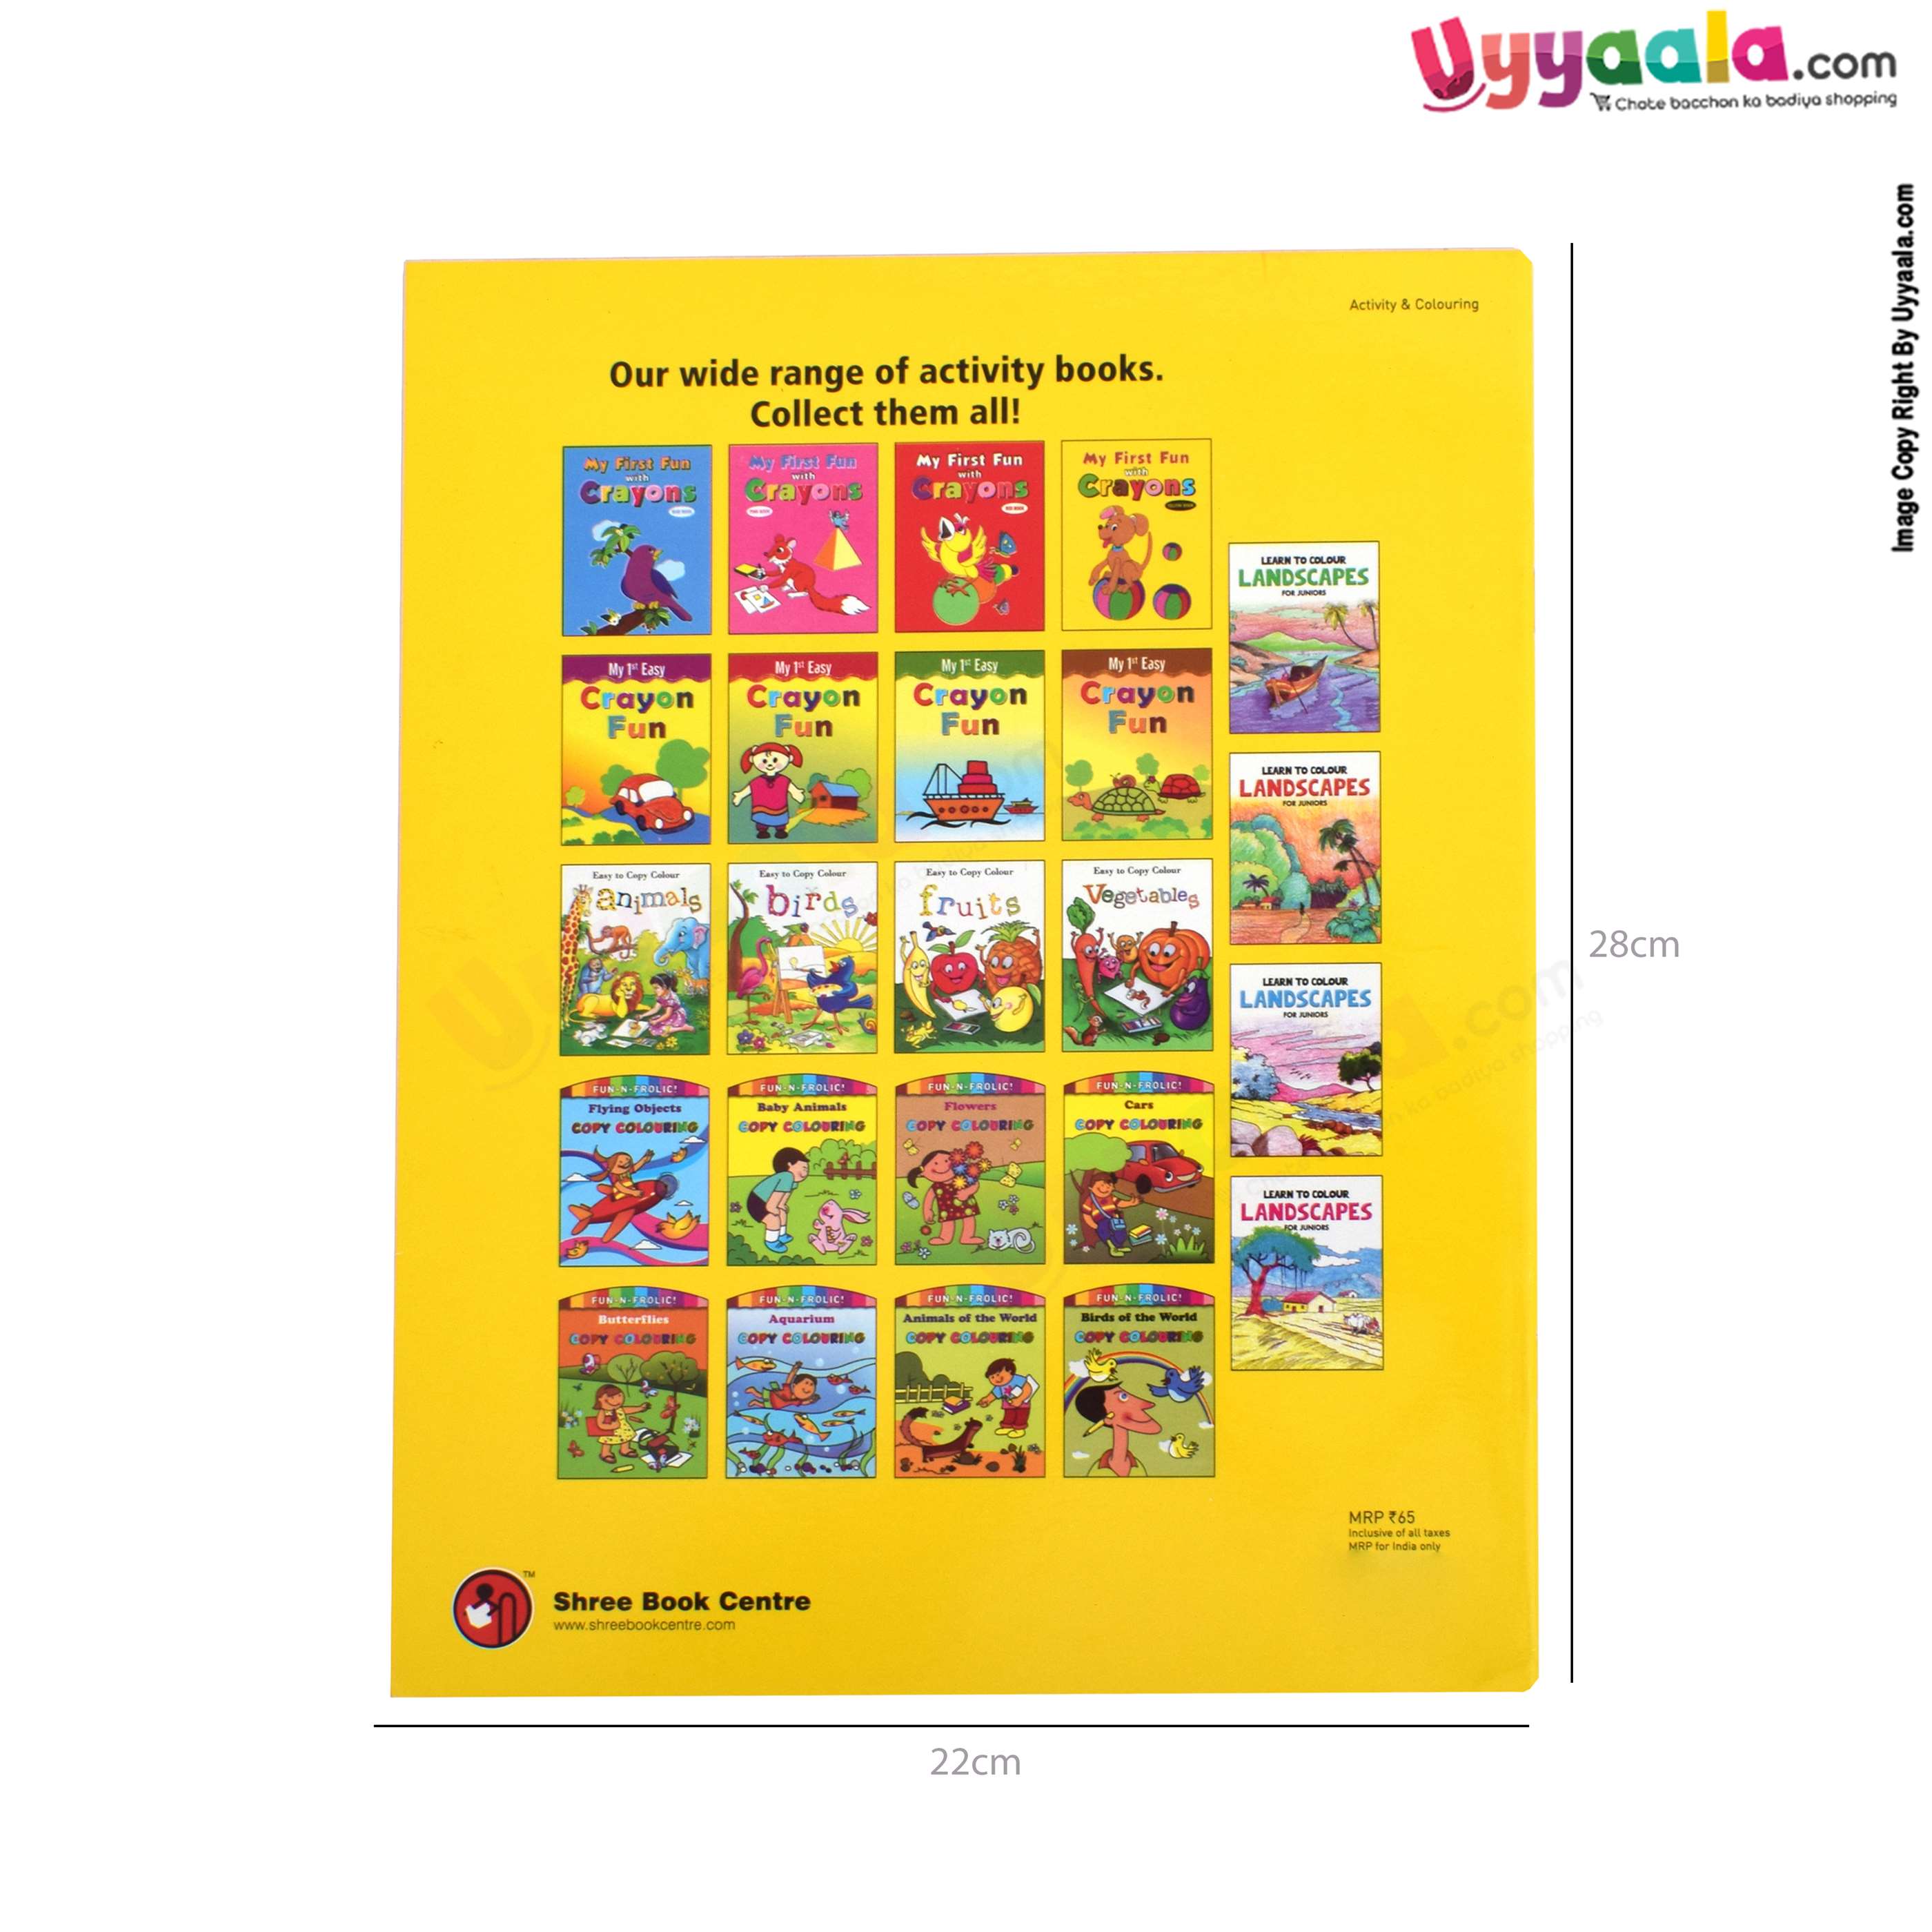 My first fun with crayons, yellow book - fun activity books, 2 - 6 years